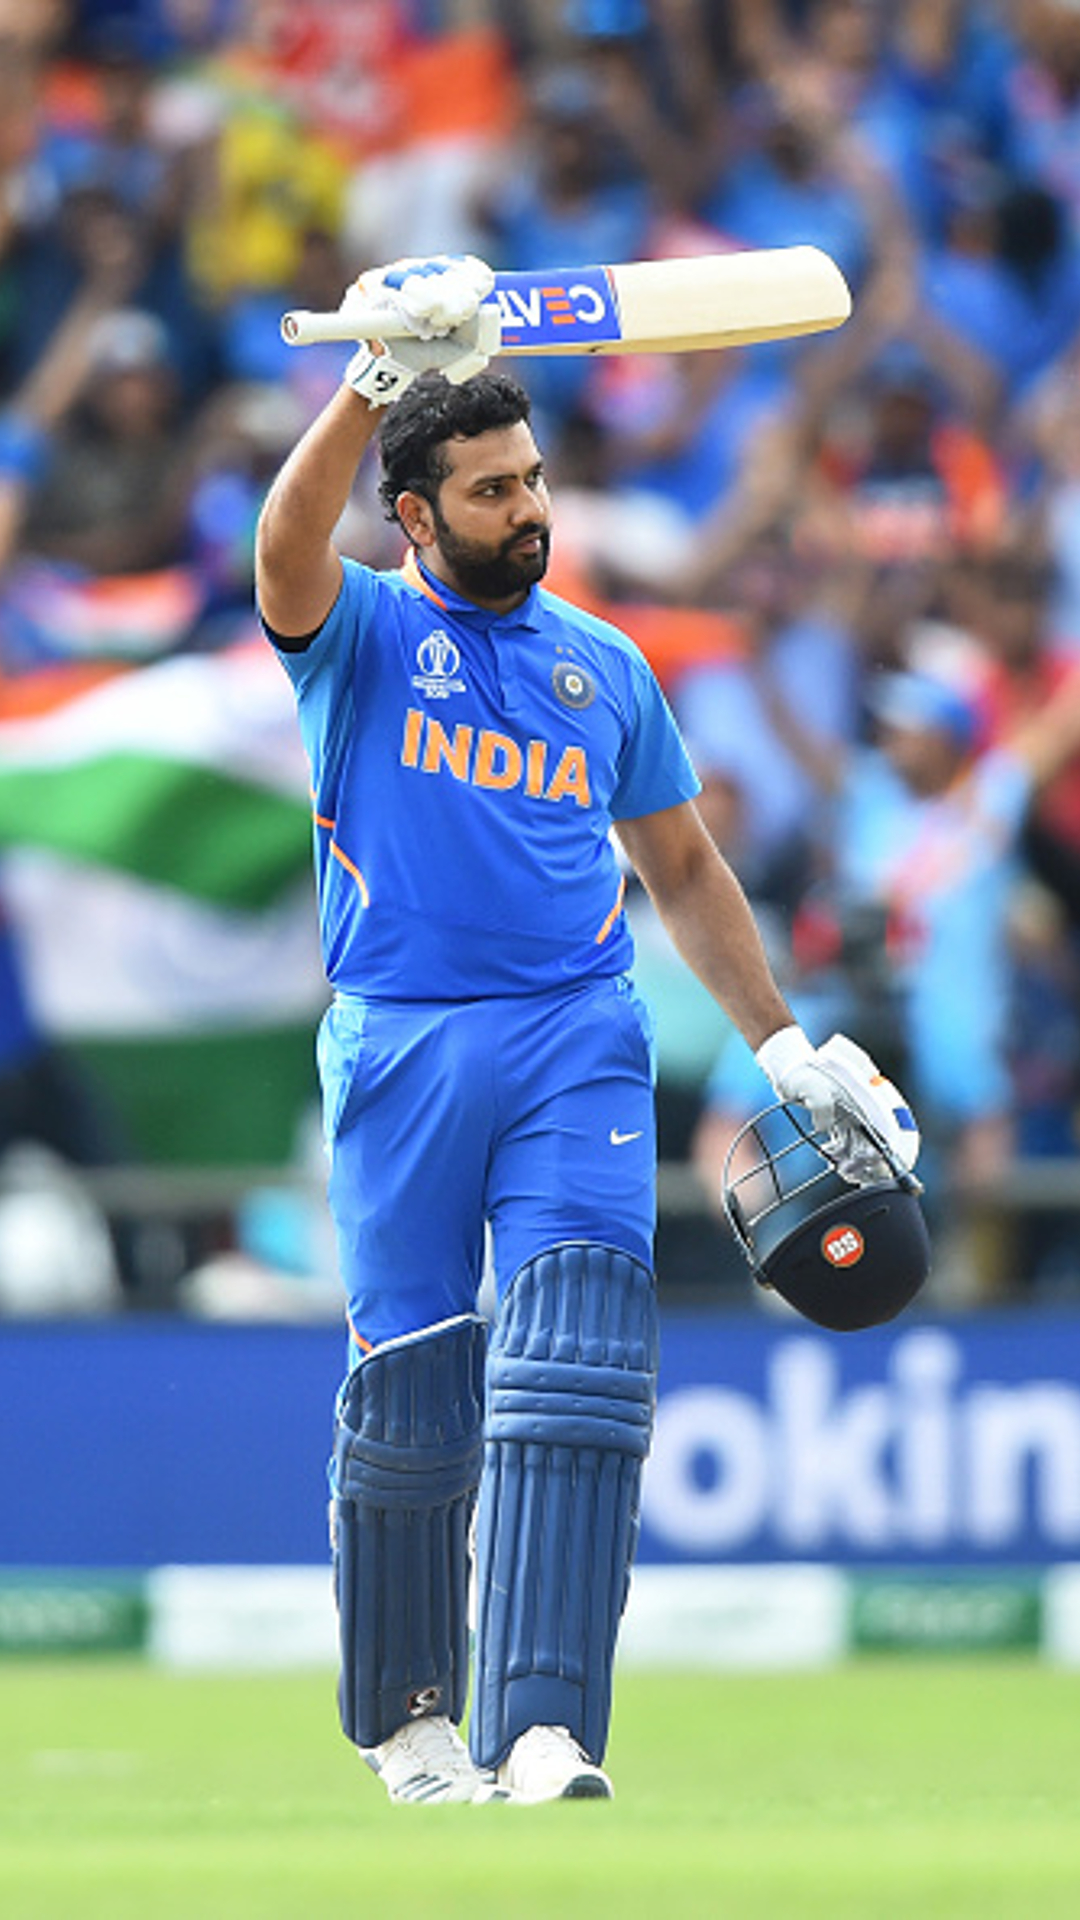 IND vs SL 2nd ODI: Highest individual ODI score for India at Eden Gardens featuring Rohit Sharma's 264